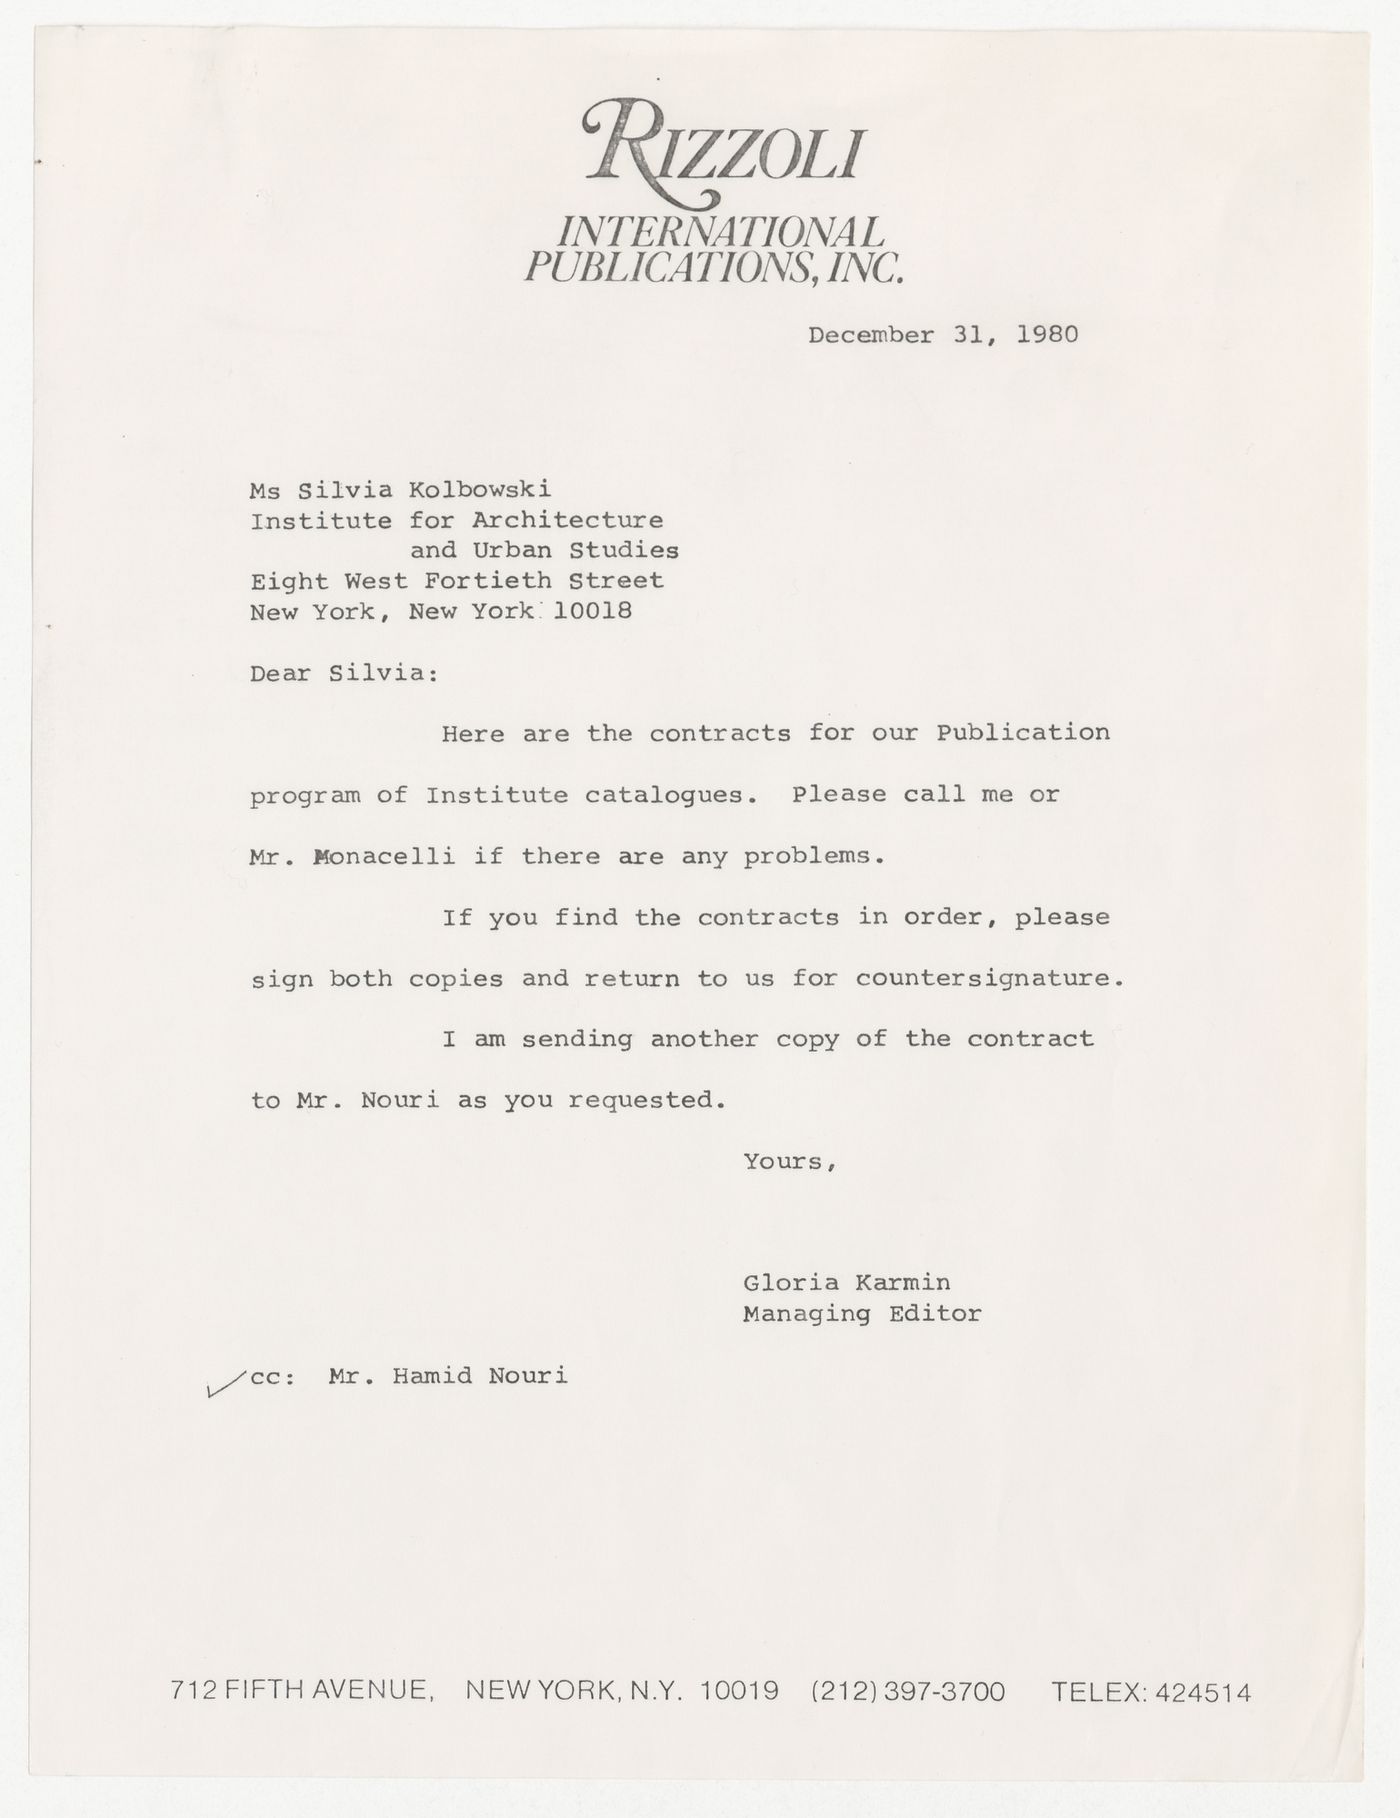 Letter from Gloria Karmin to Silvia Kolbowski with attached contract for publication of IAUS catalogues with Rizzoli